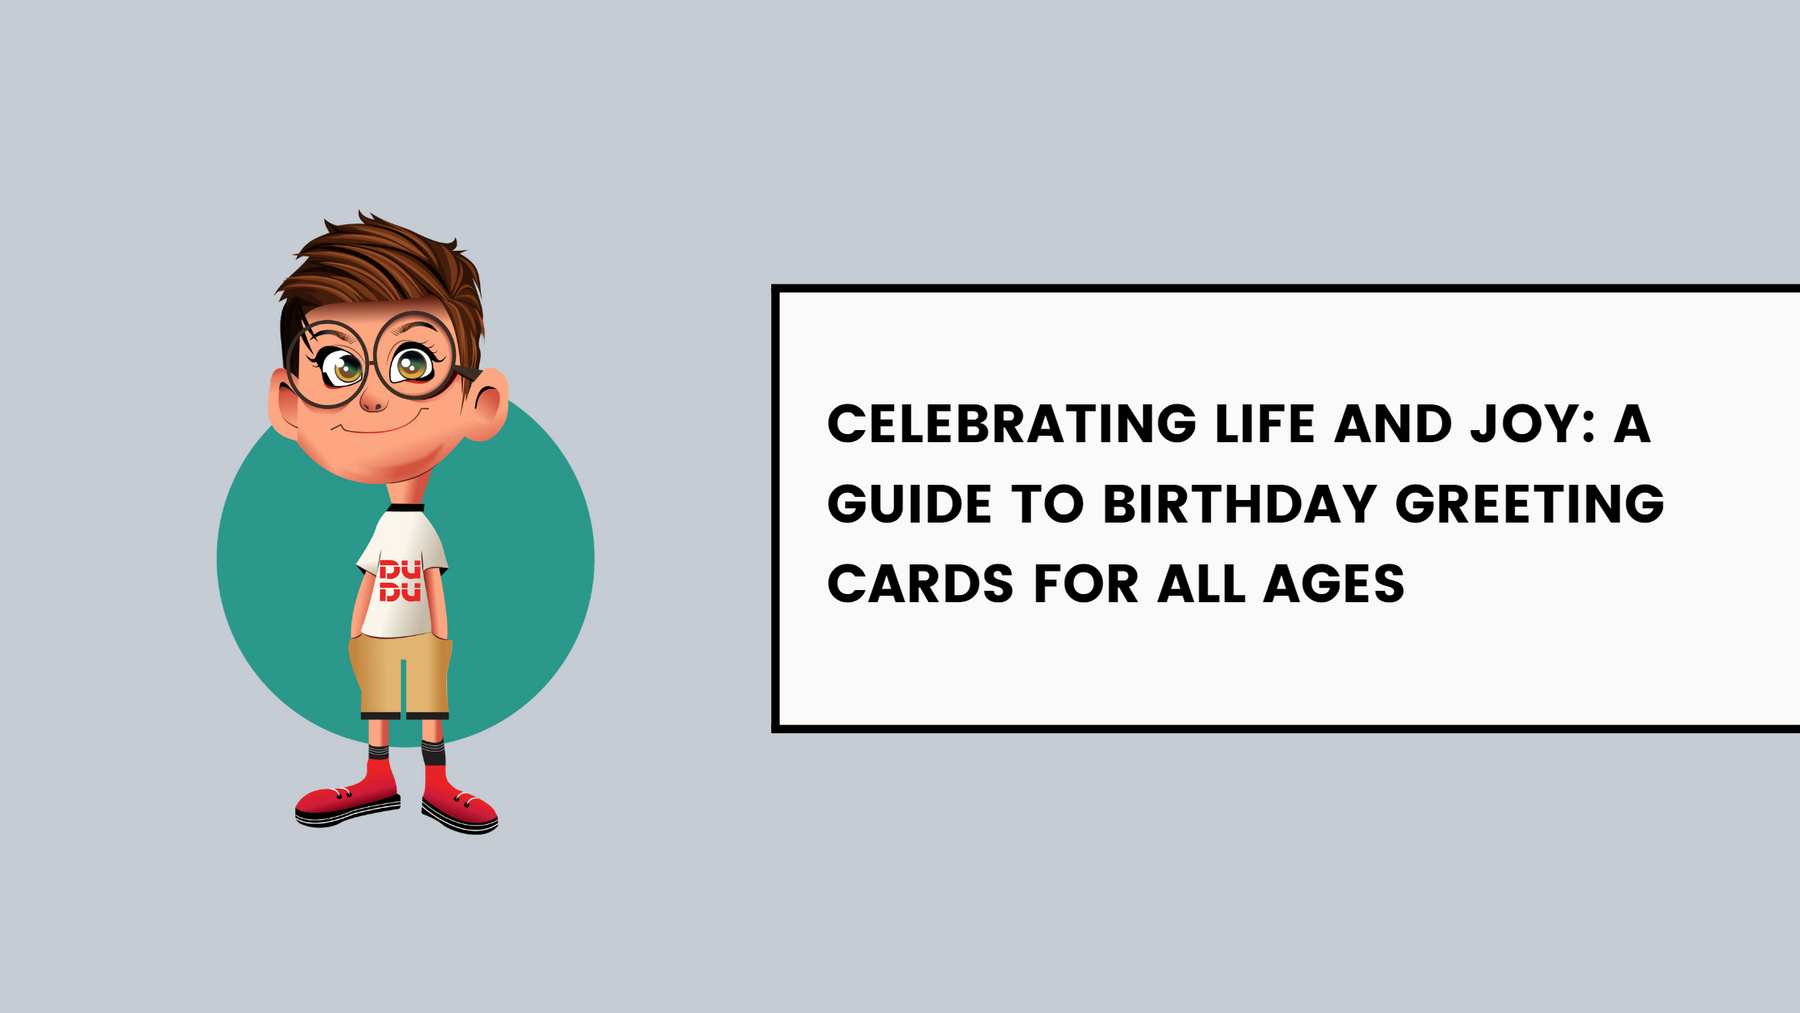 Celebrating Life And Joy: A Guide To Birthday Greeting Cards For All Ages